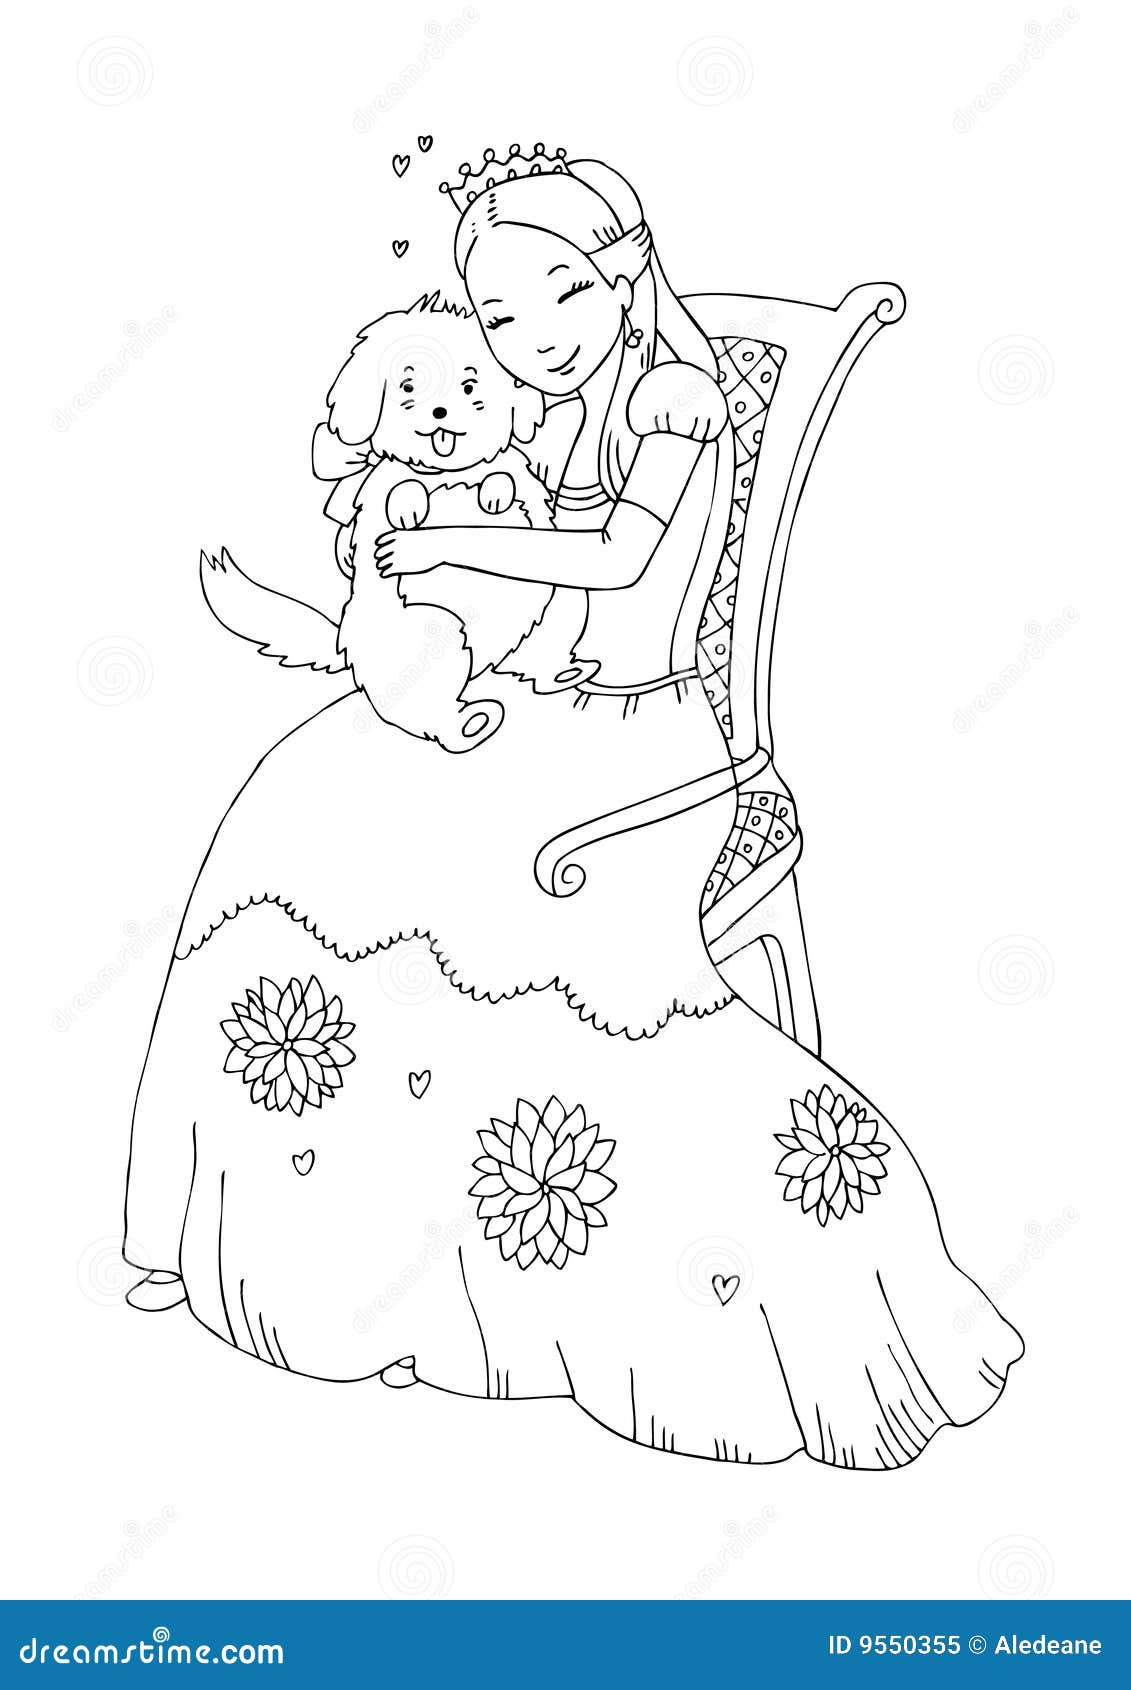 Princess with dog coloring page stock illustration